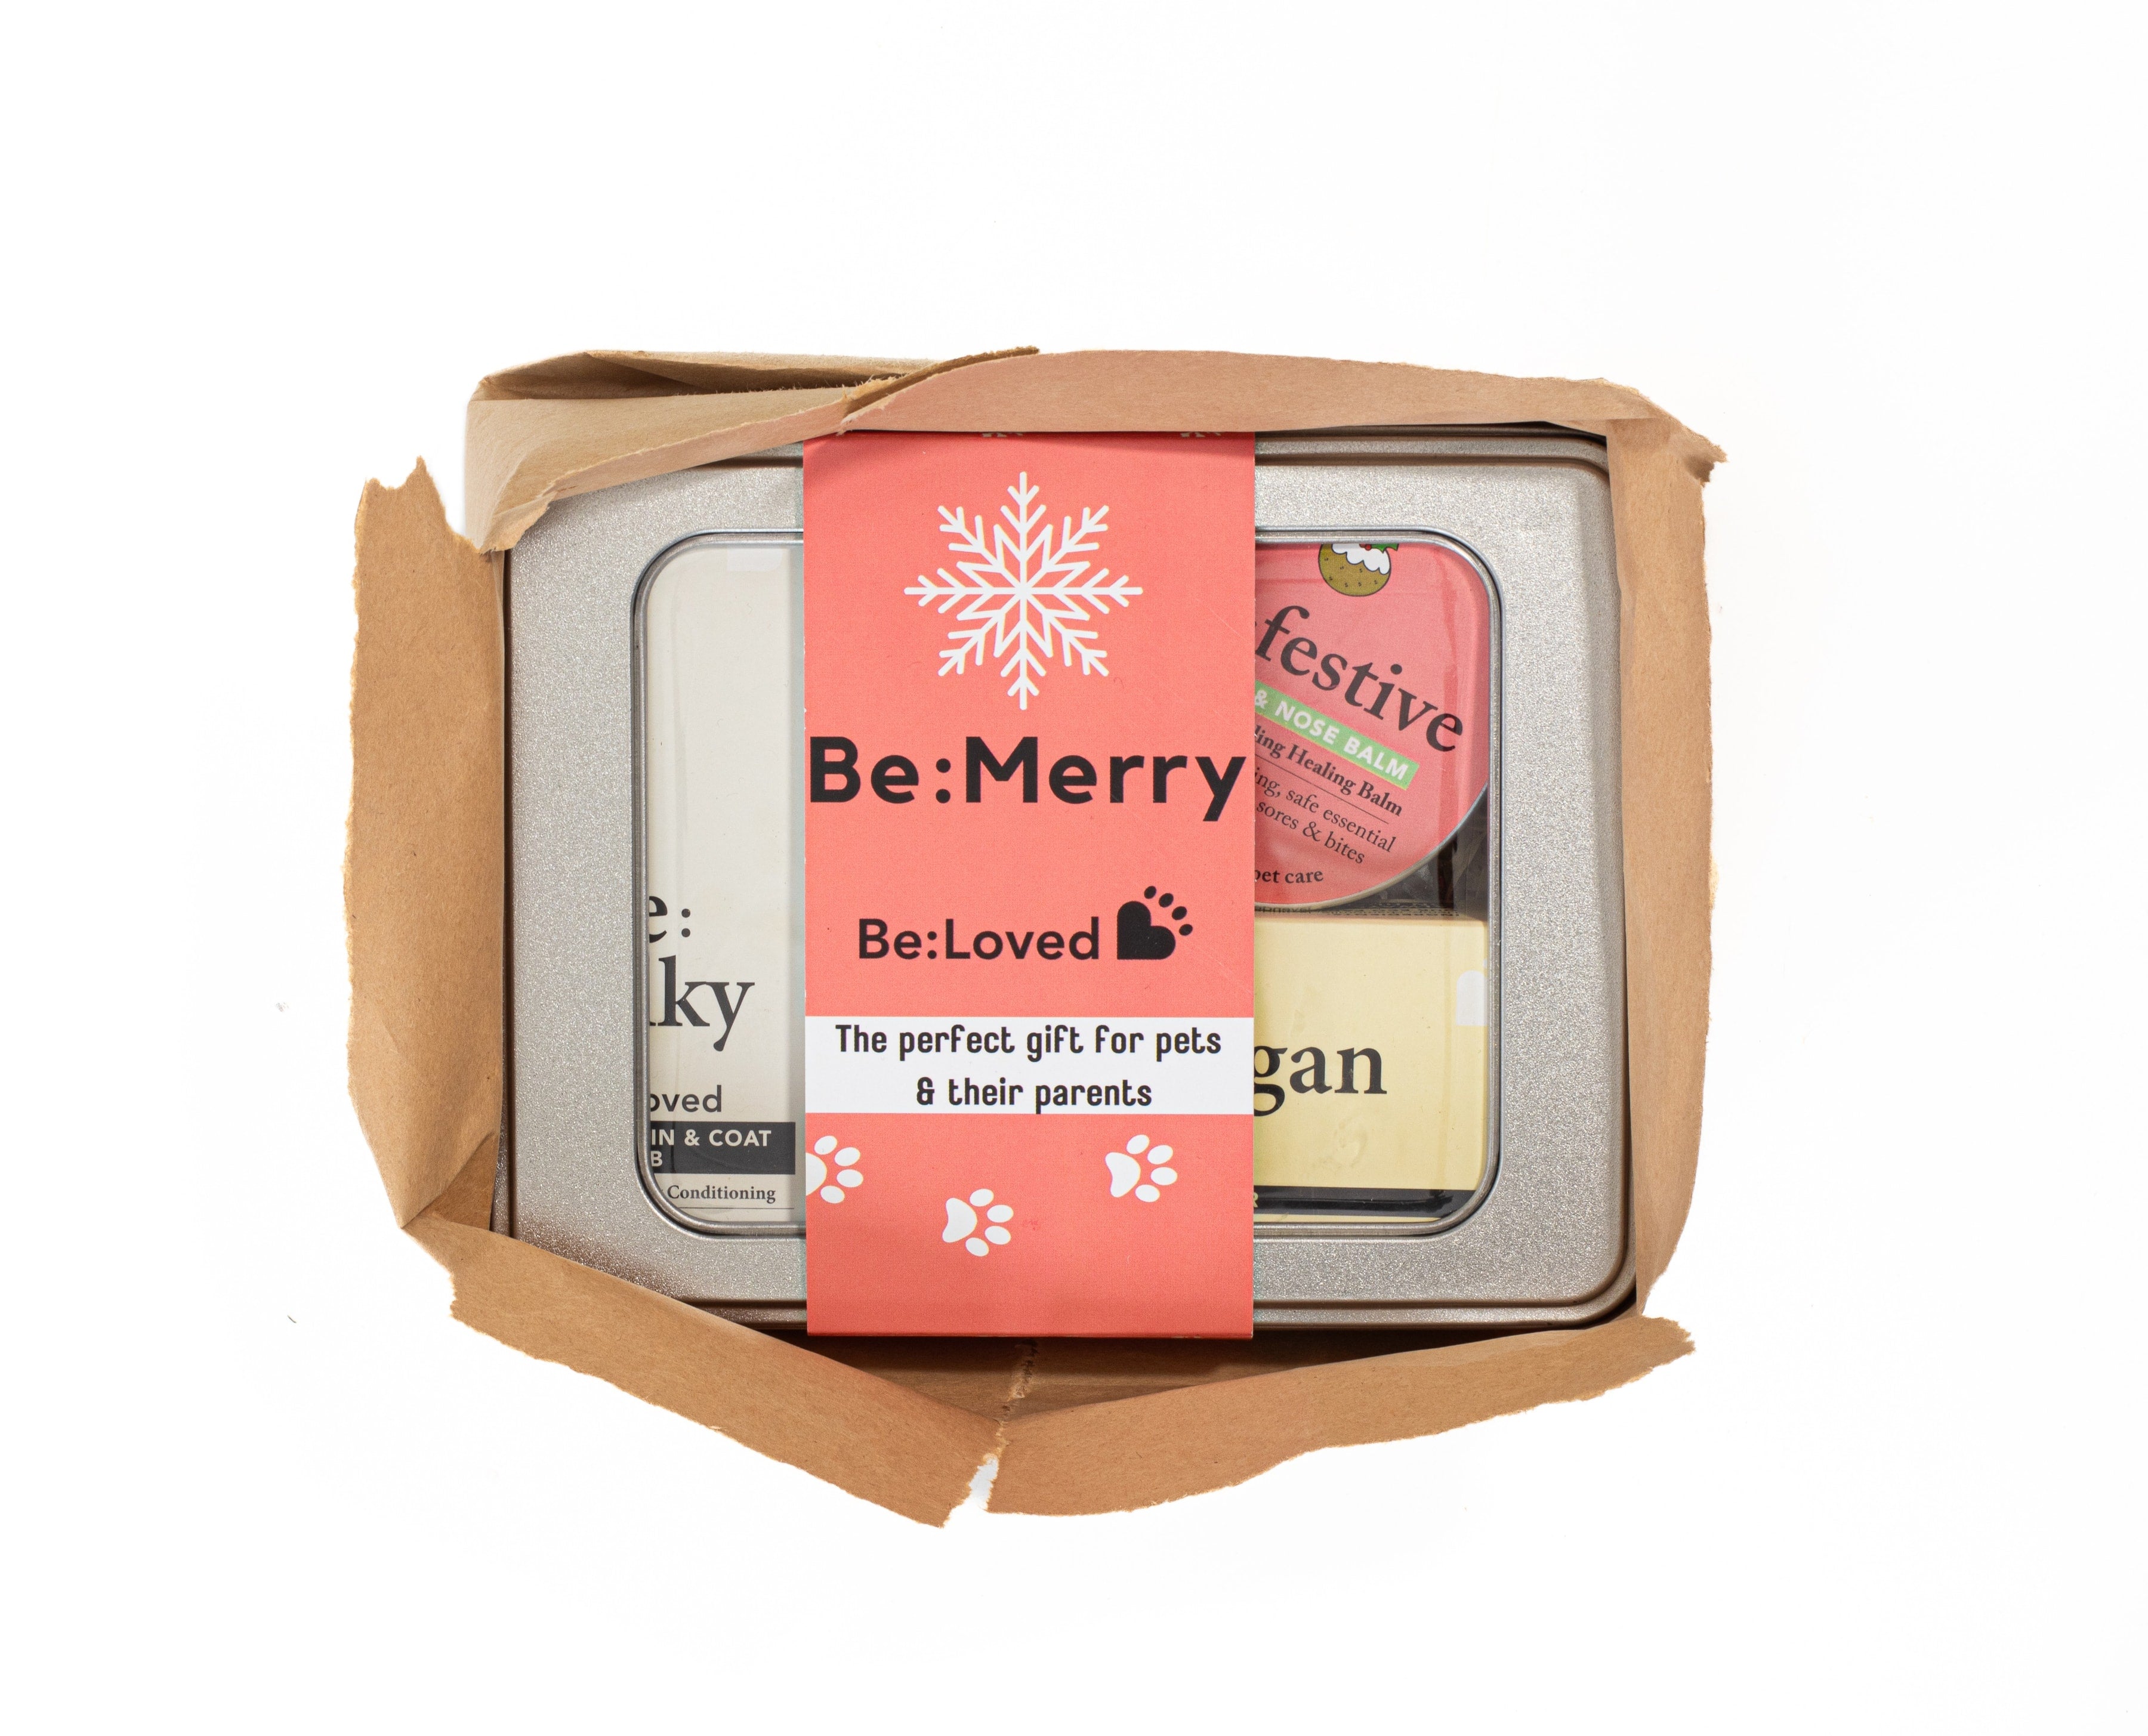 Be:Merry gift set in brown wrapping paper